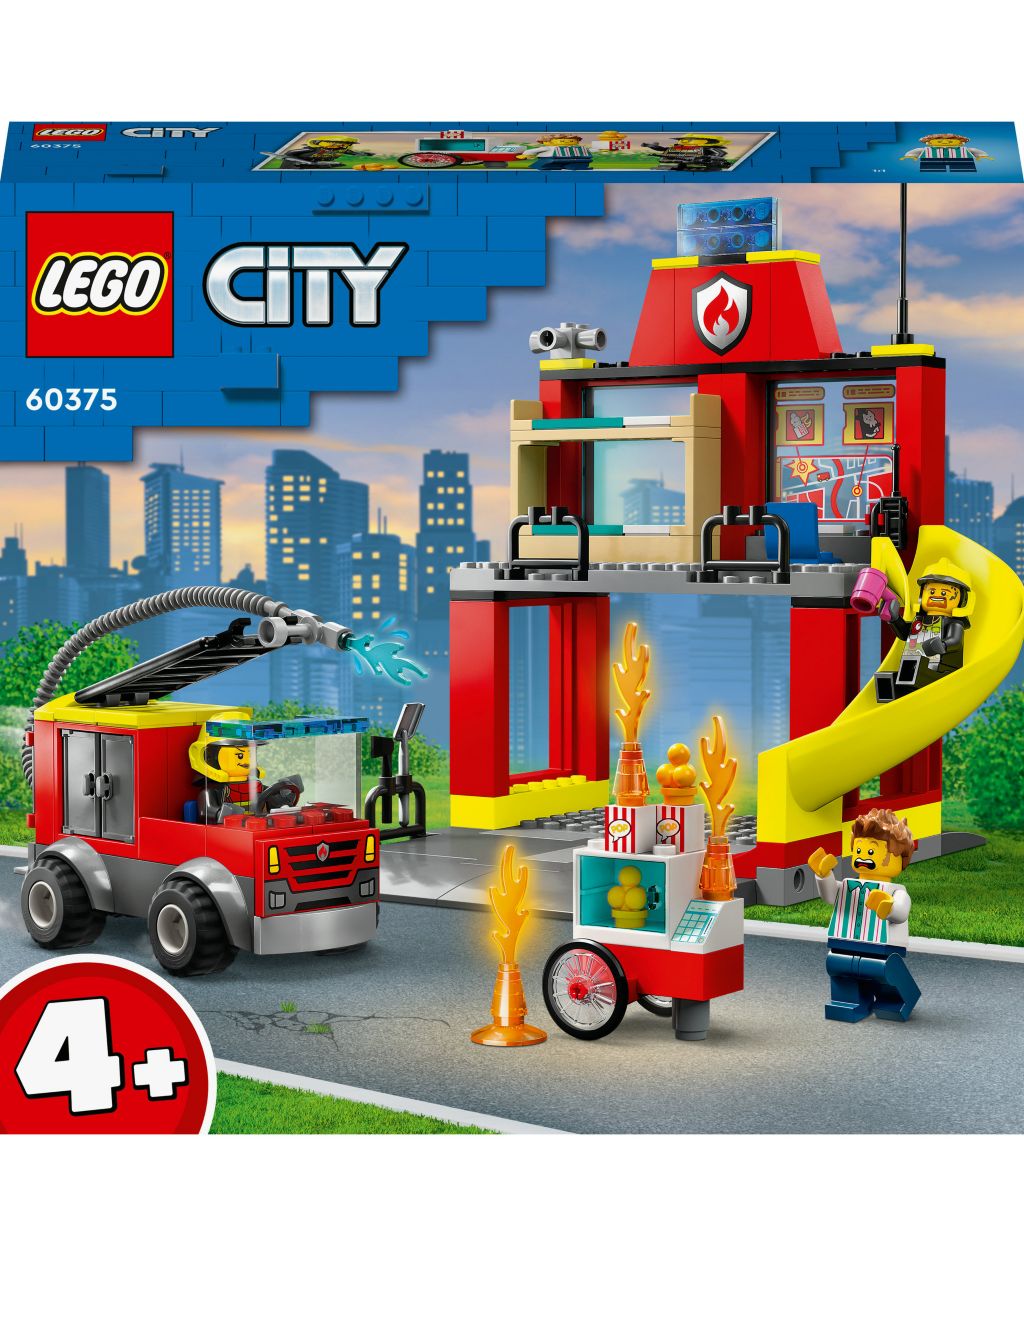 LEGO City Fire Station and Fire Engine Toys (4+ Yrs) image 3